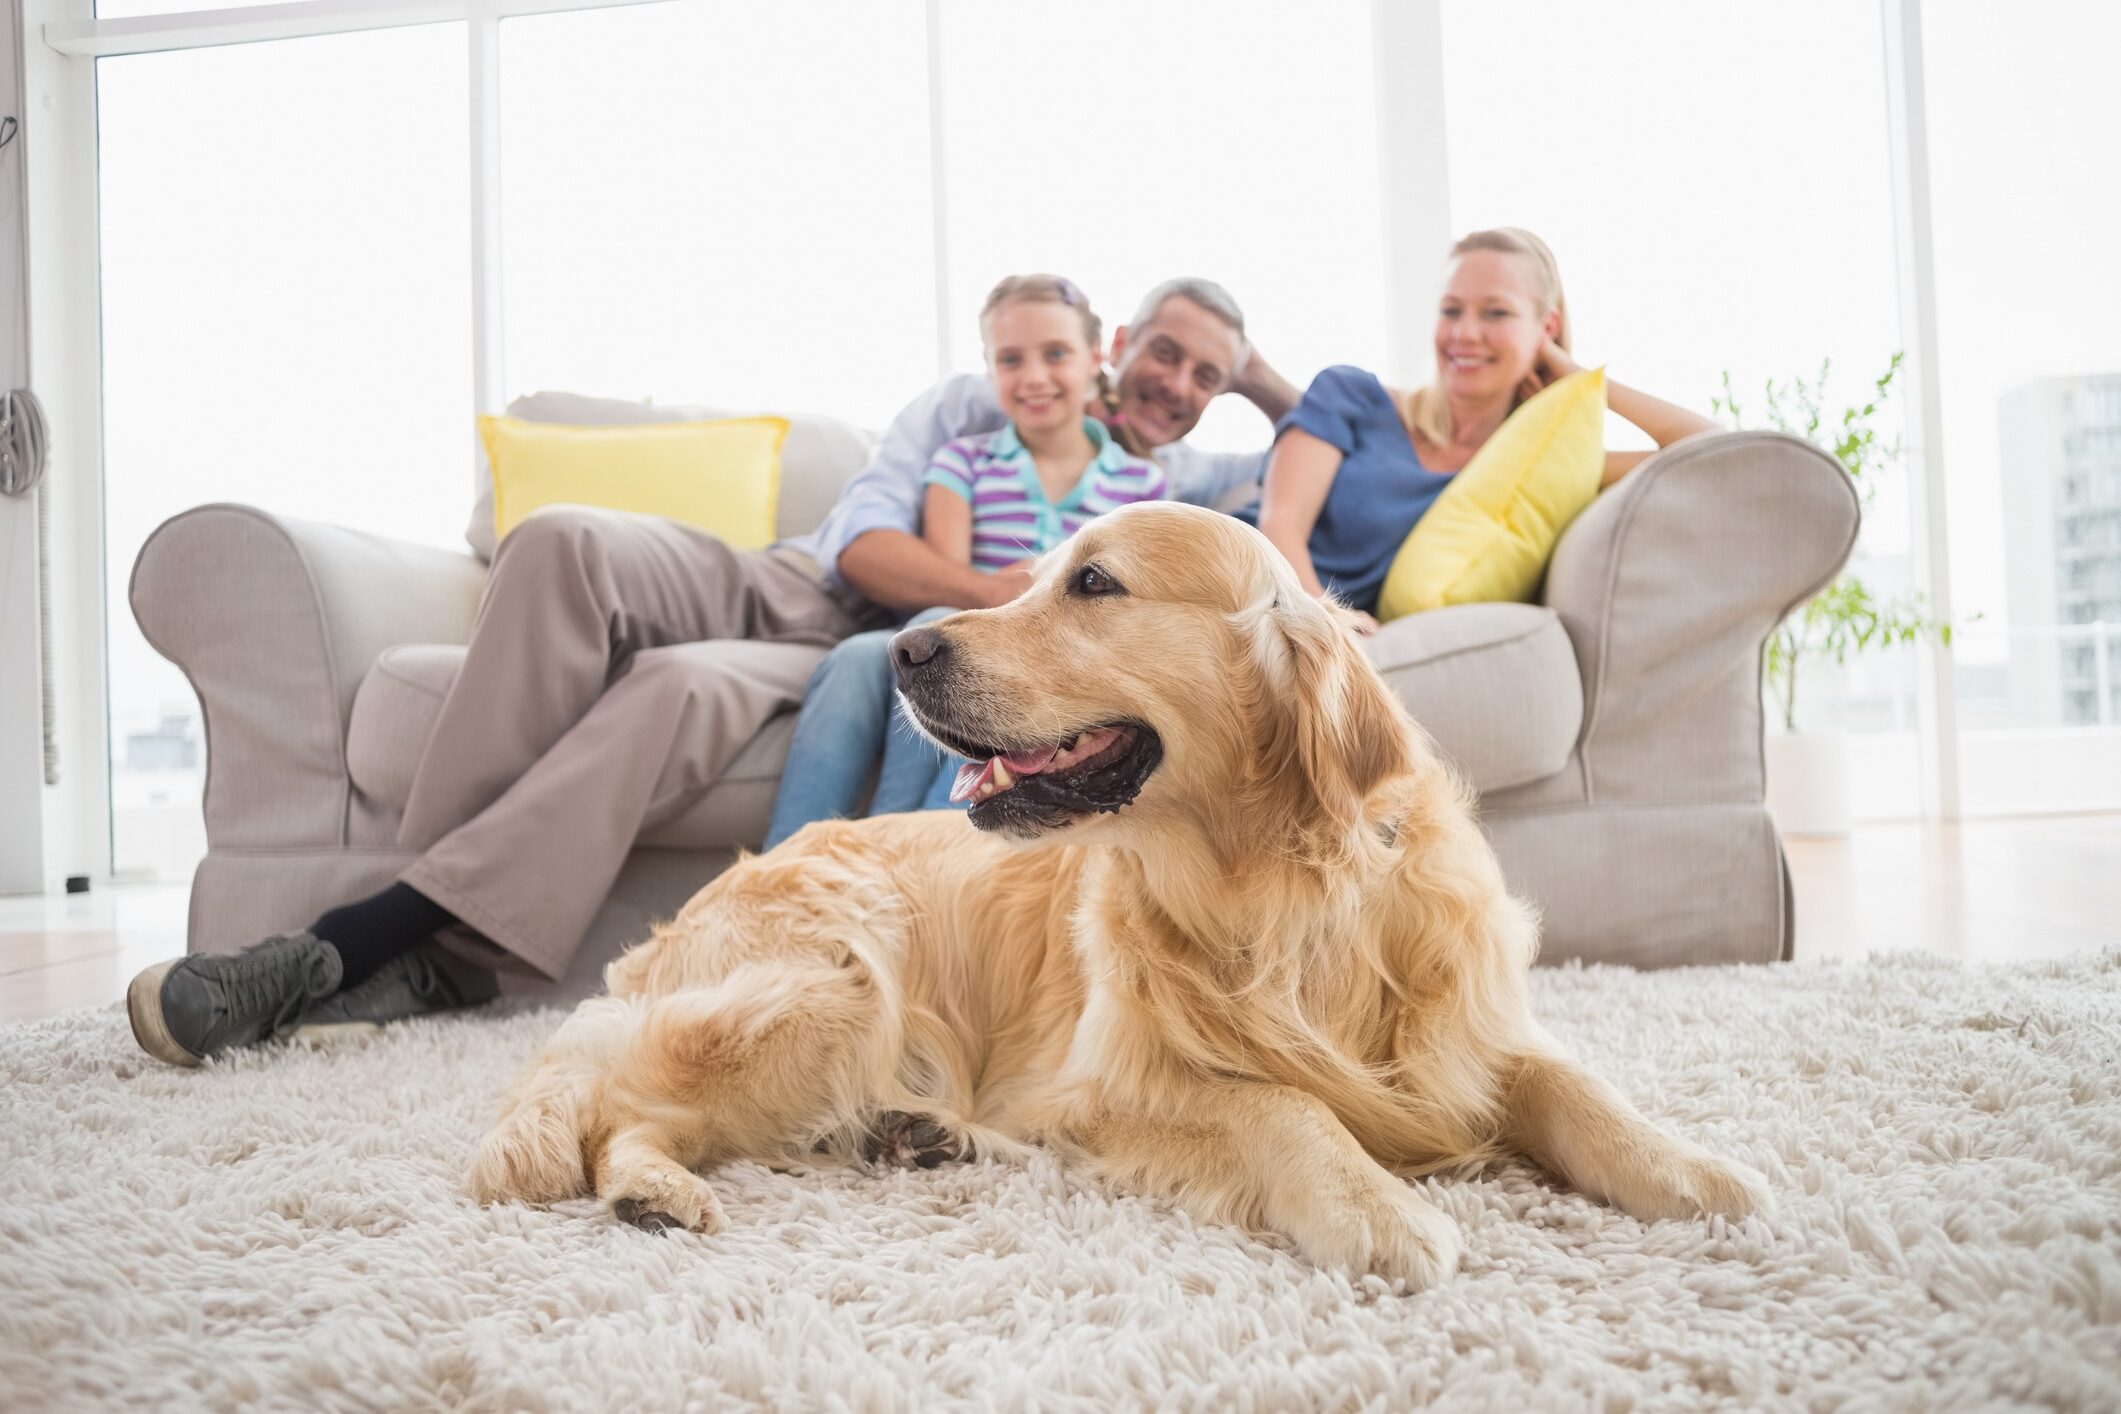 A golden retriever lies on a fluffy carpet in a bright room, with three smiling people lounging comfortably on a couch behind it.